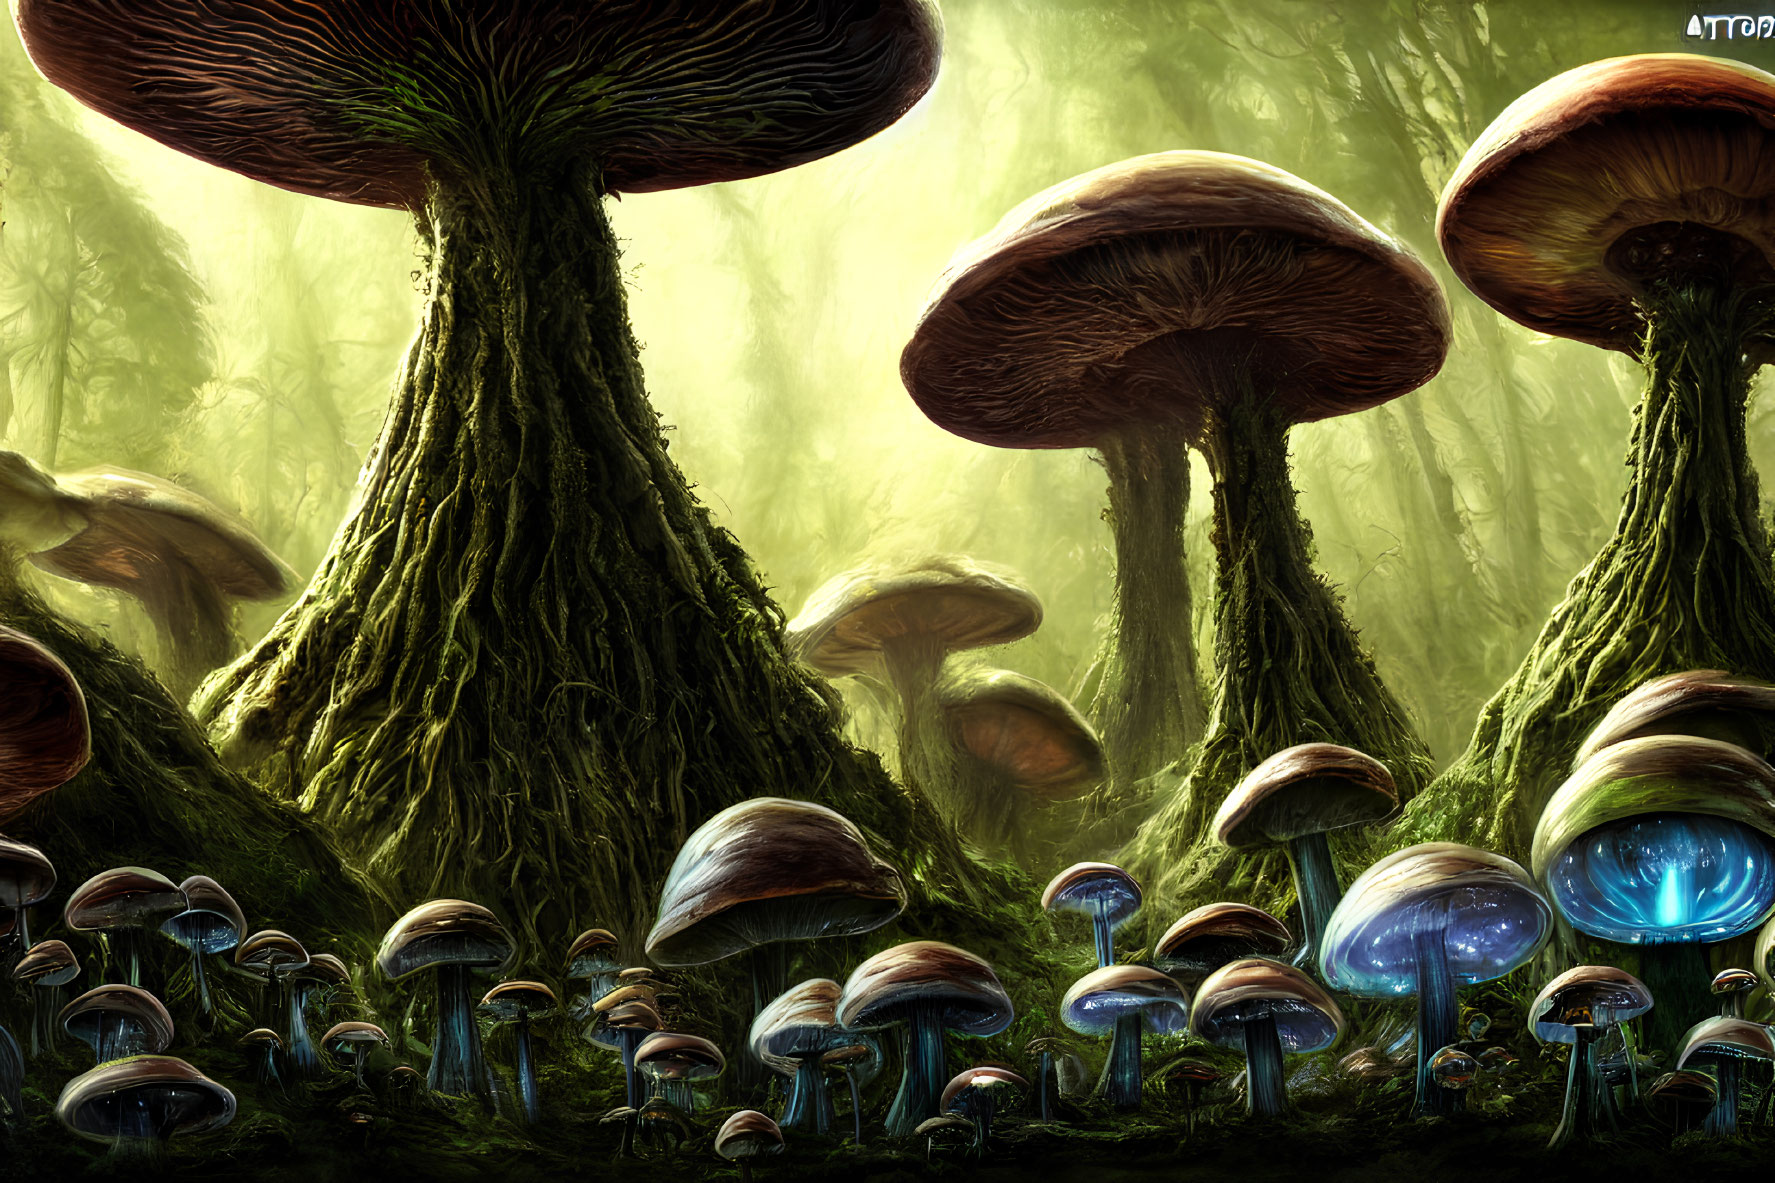 Enchanting forest with oversized mushrooms under magical glow